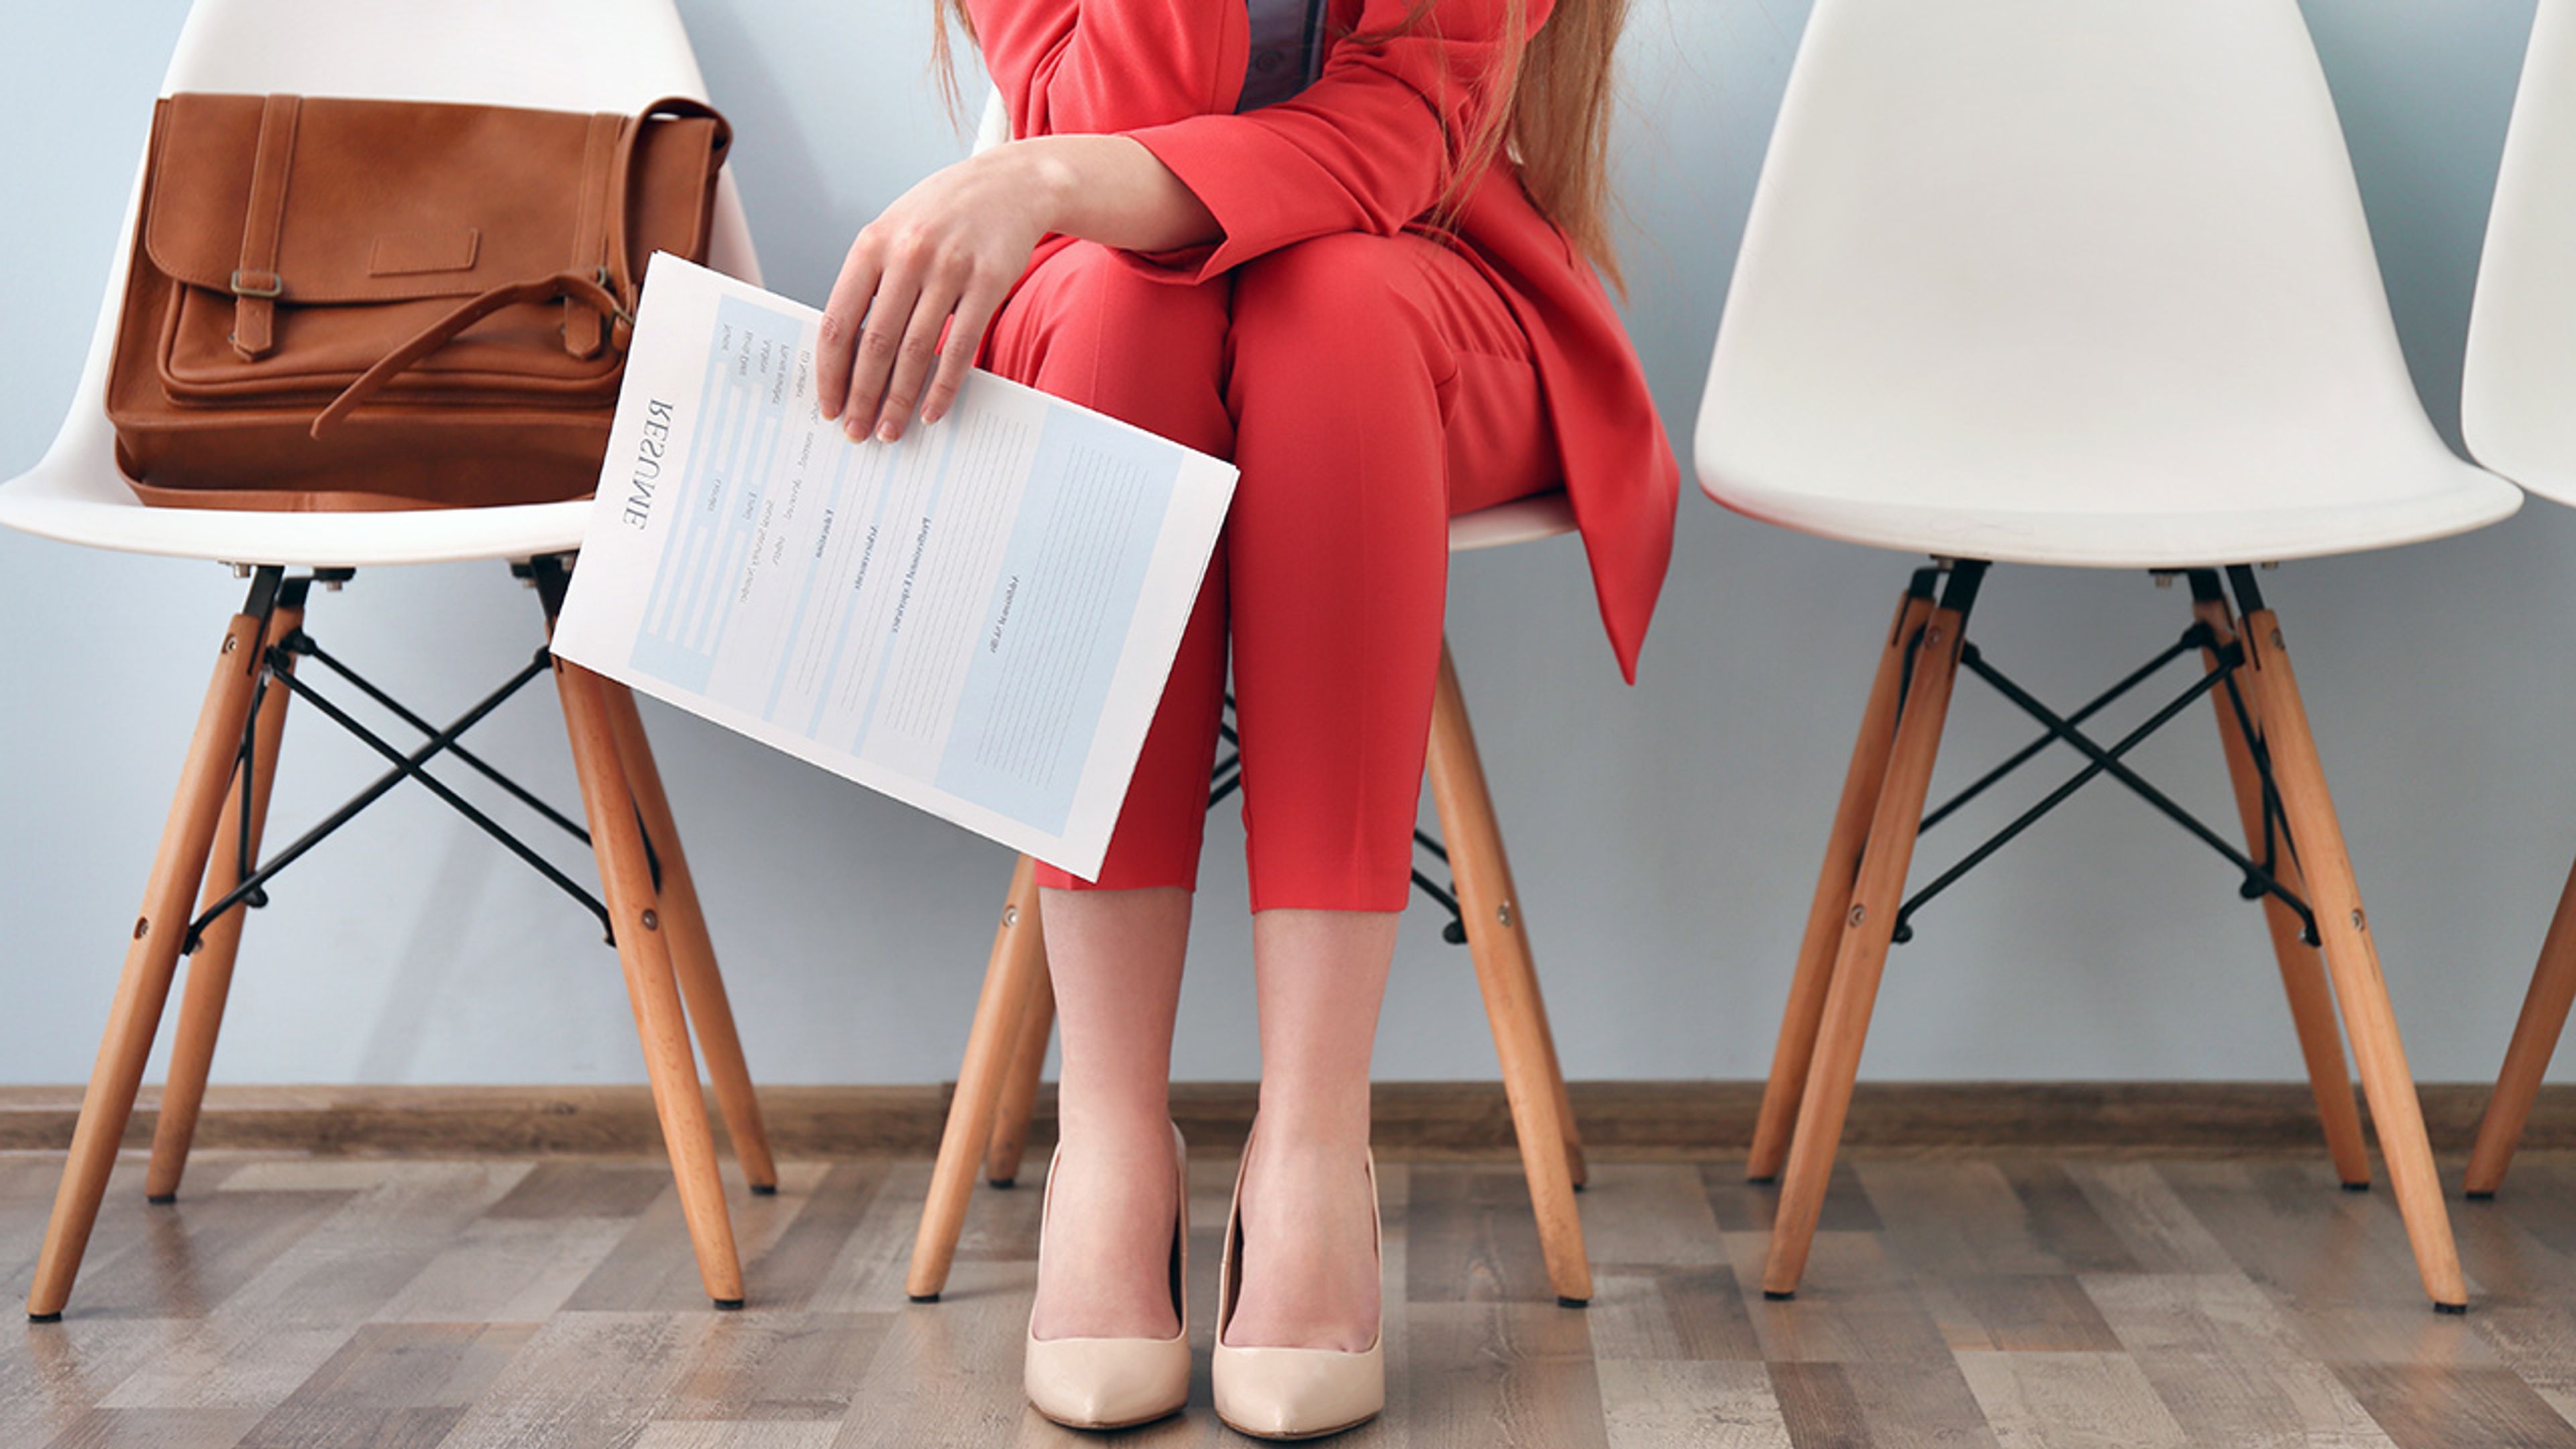 How to Navigate Job Search After Being Laid Off